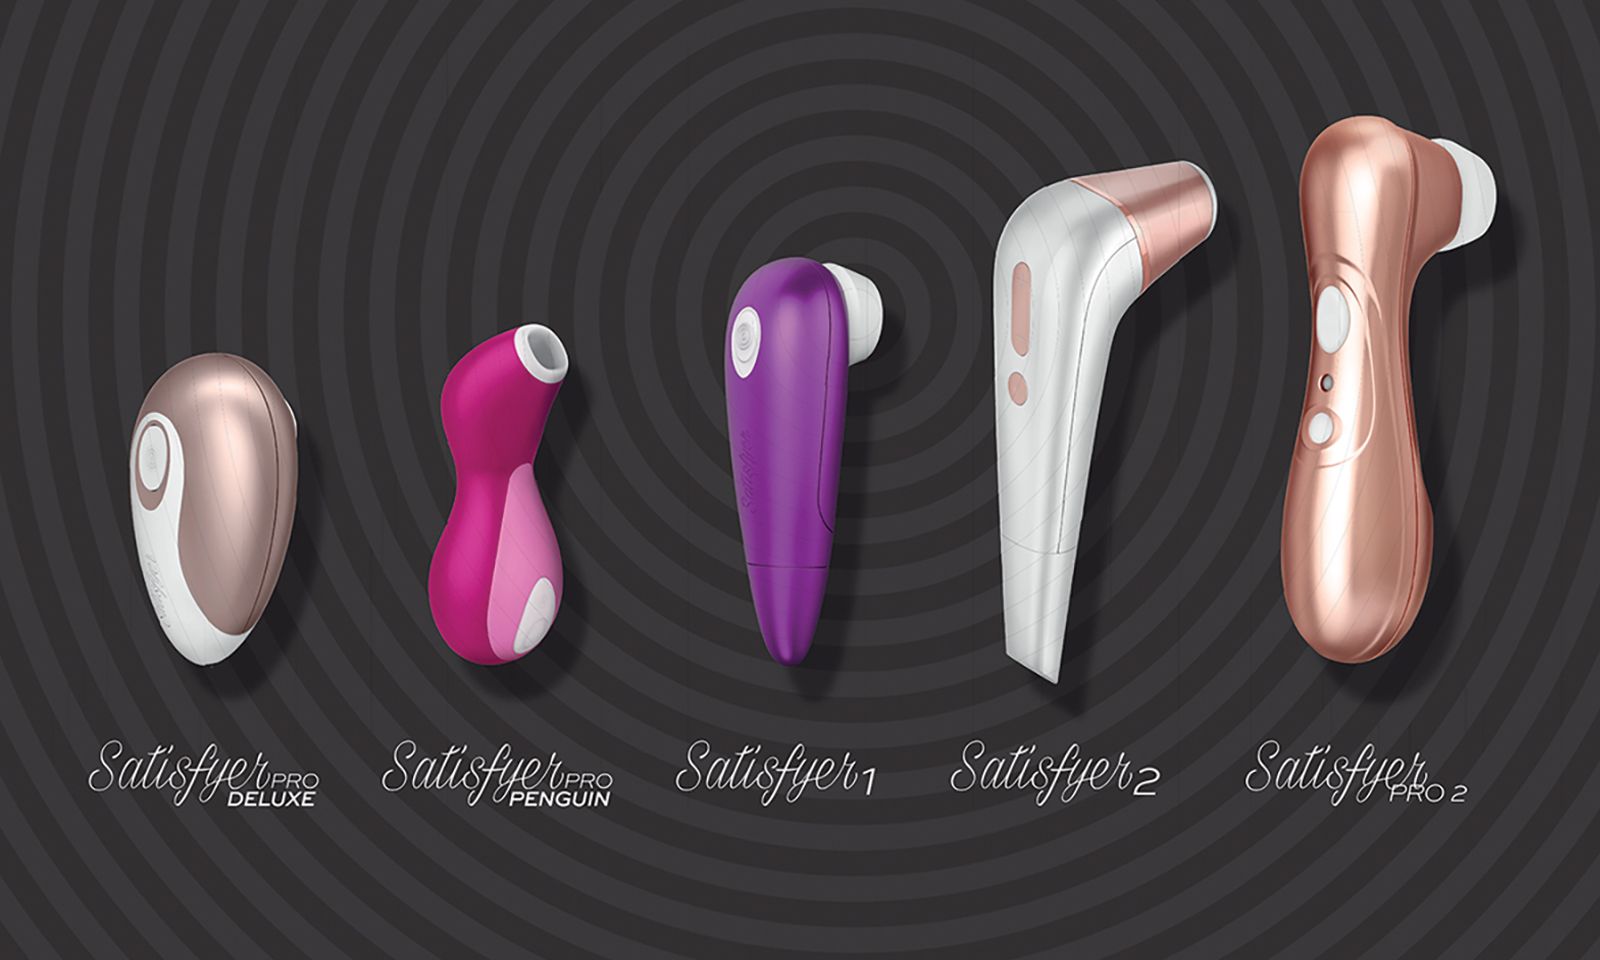 Satisfyer: Meeting Demand With Innovation